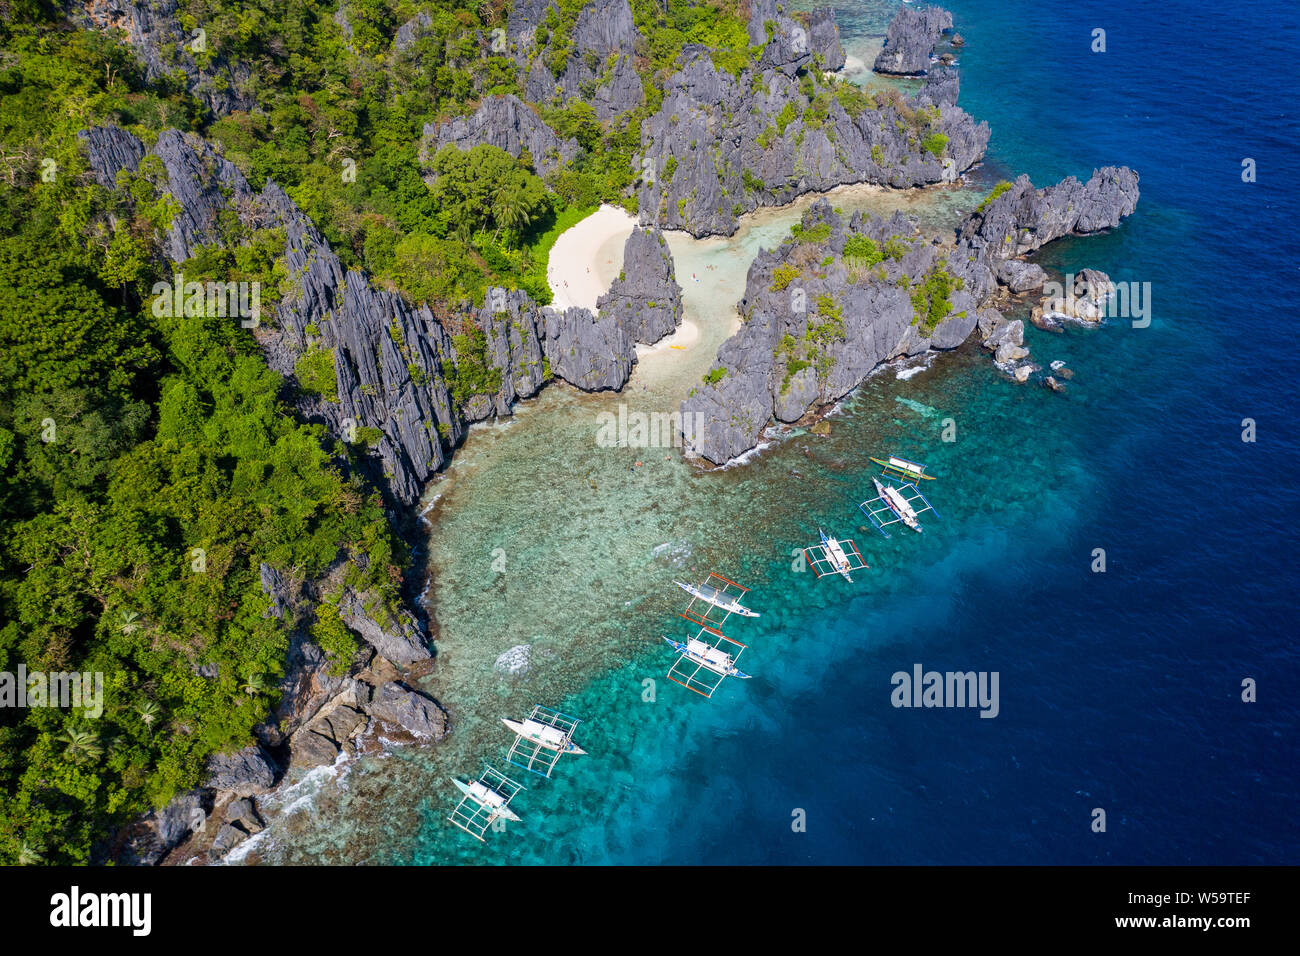 Aerial view taken with a drone of Banca outrigger boats moored at Hidden beach,El Nido,Palawan,Philippines Stock Photo